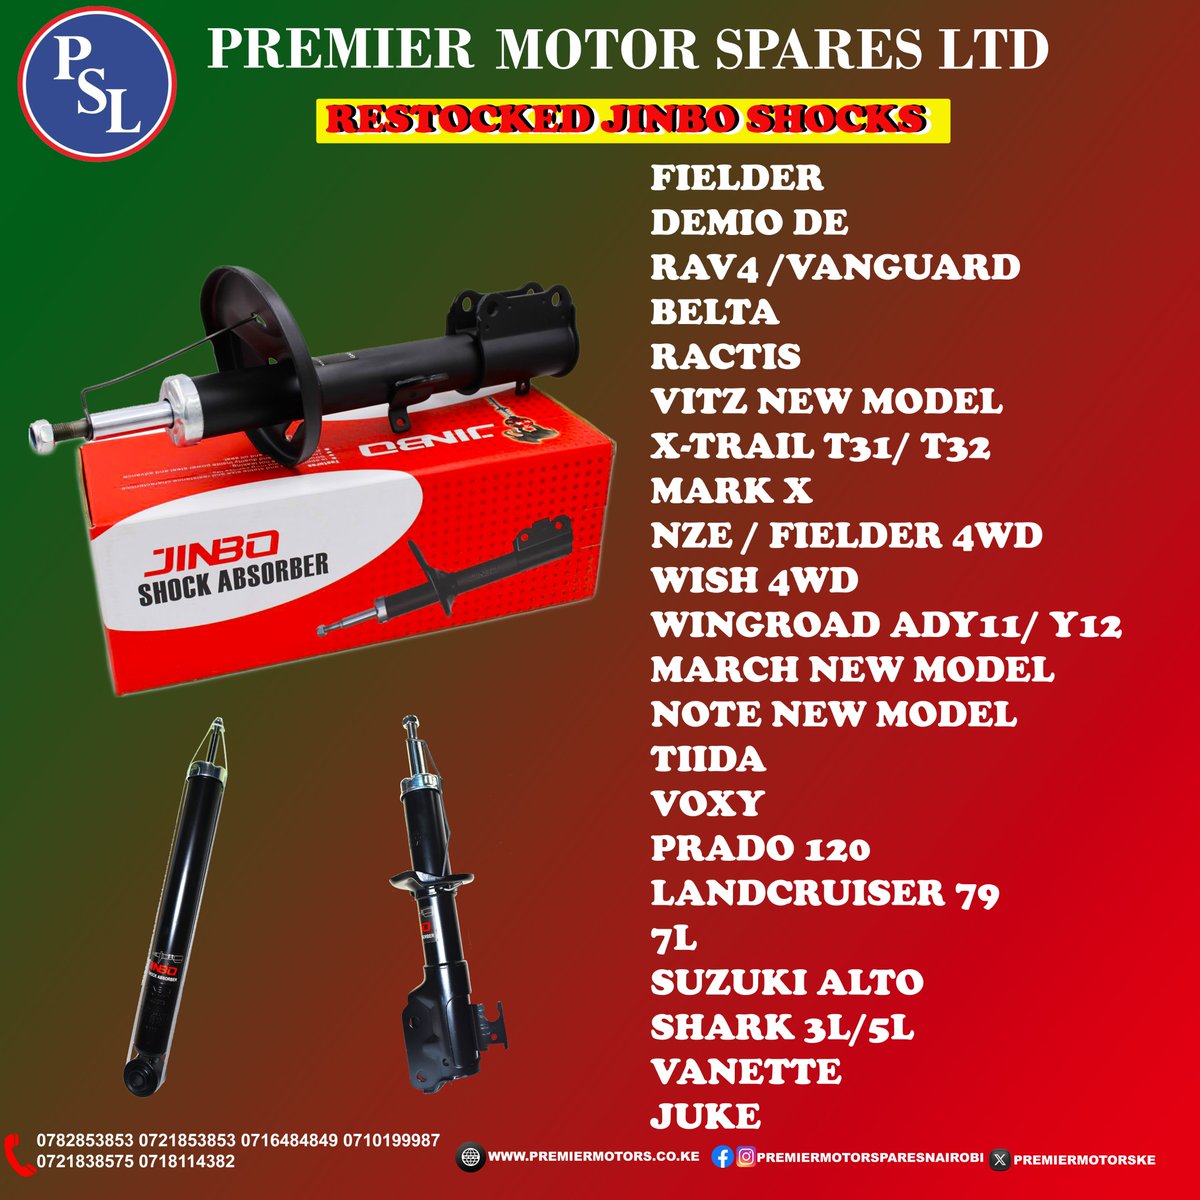 Affordable, reliable and quality Jinbo Shock Absorbers now restocked for the following cars on the poster. Visit our shops or calls us on 0782853853 0721853853 0710199987 0716484849 for convenience. Quality is our promise. #premiermotorspares #jinboshocks Mpesa Safaricom Osama